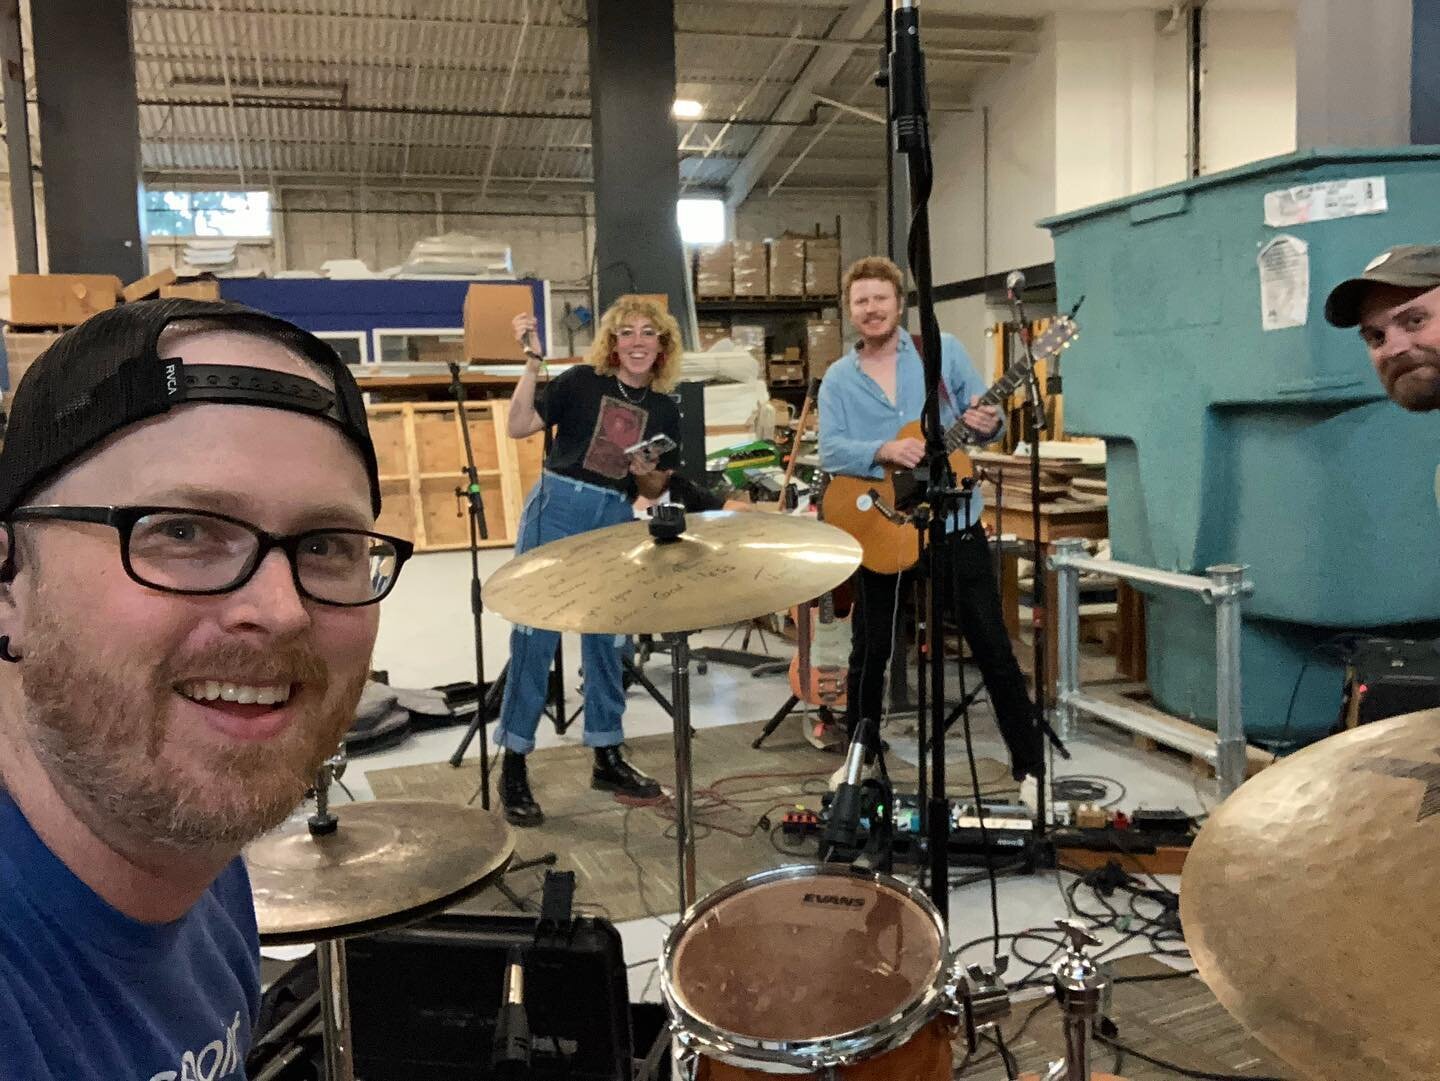 The fiberglass tank is a stage prop - ok? Cooked up some beautiful Americana with these soul shredders this weekend. Excited to be prepping for some full band shows 👨&zwj;🍳 👩&zwj;🍳